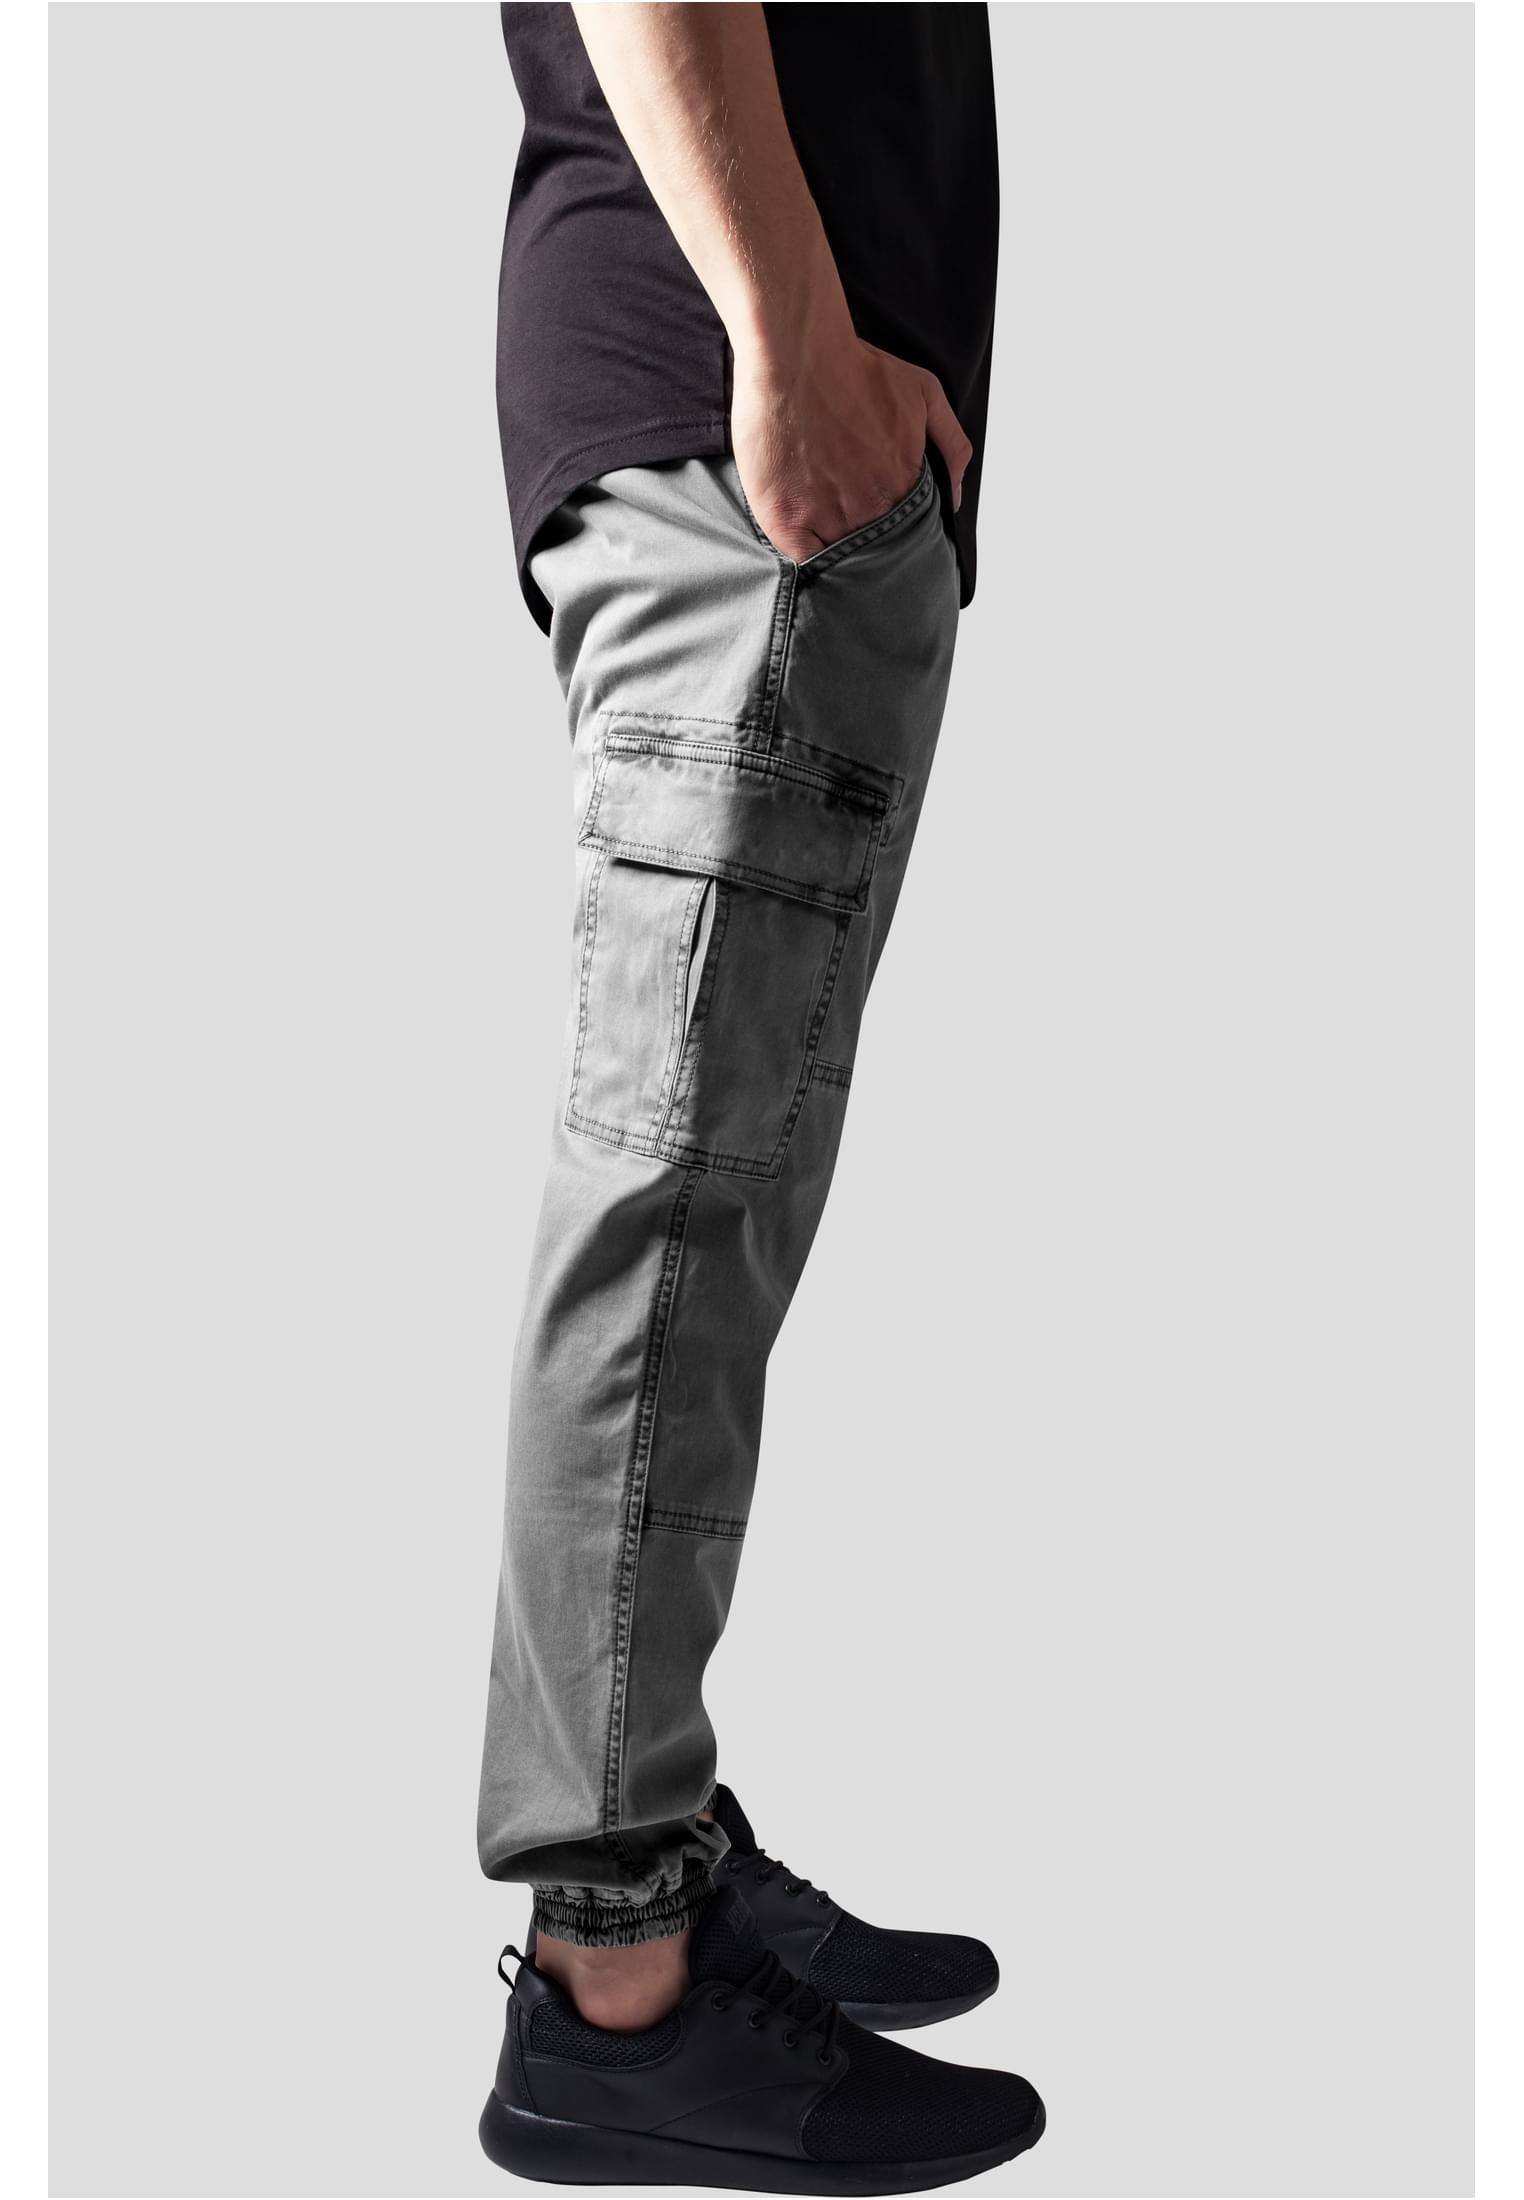 Sweatpants Washed Cargo Twill Jogging Pants in Farbe grey